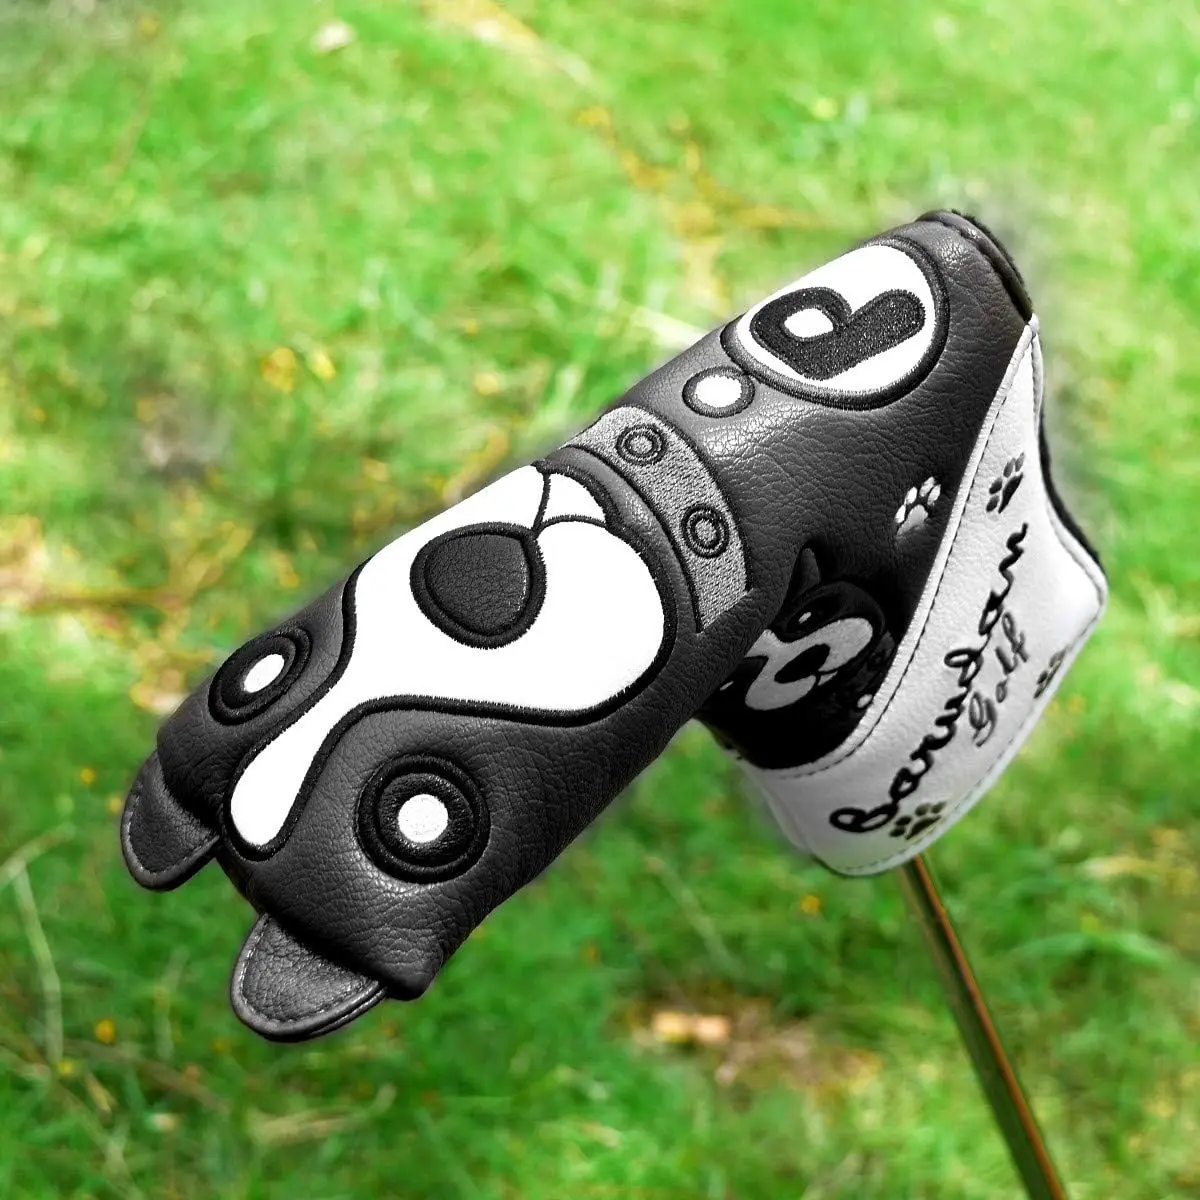 

GOLF Lovely Dog Cartoon Putter Cover Headcover Blade Putters Head Cover with Magnet Magnetic Closure Leather fit All Brand